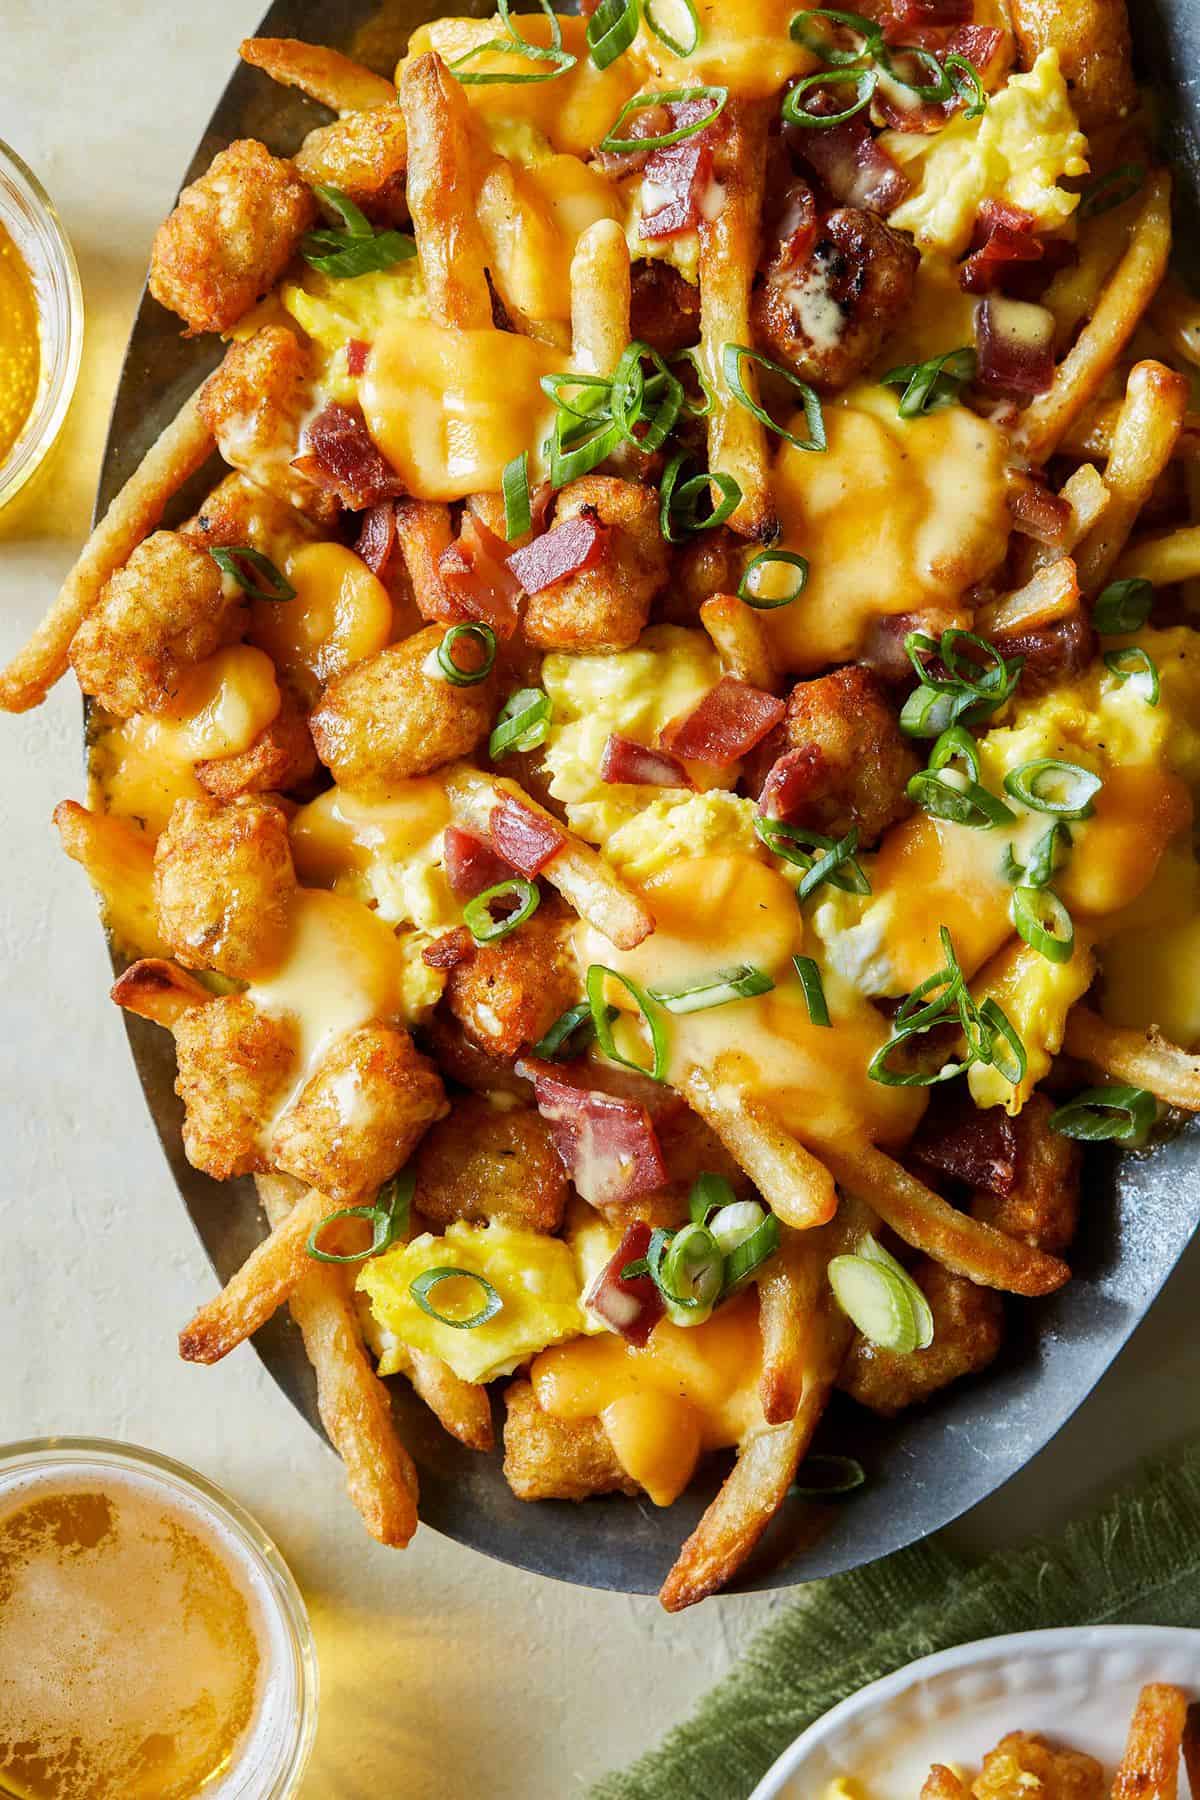 Yummy breakfast poutine - perfect for brunch!